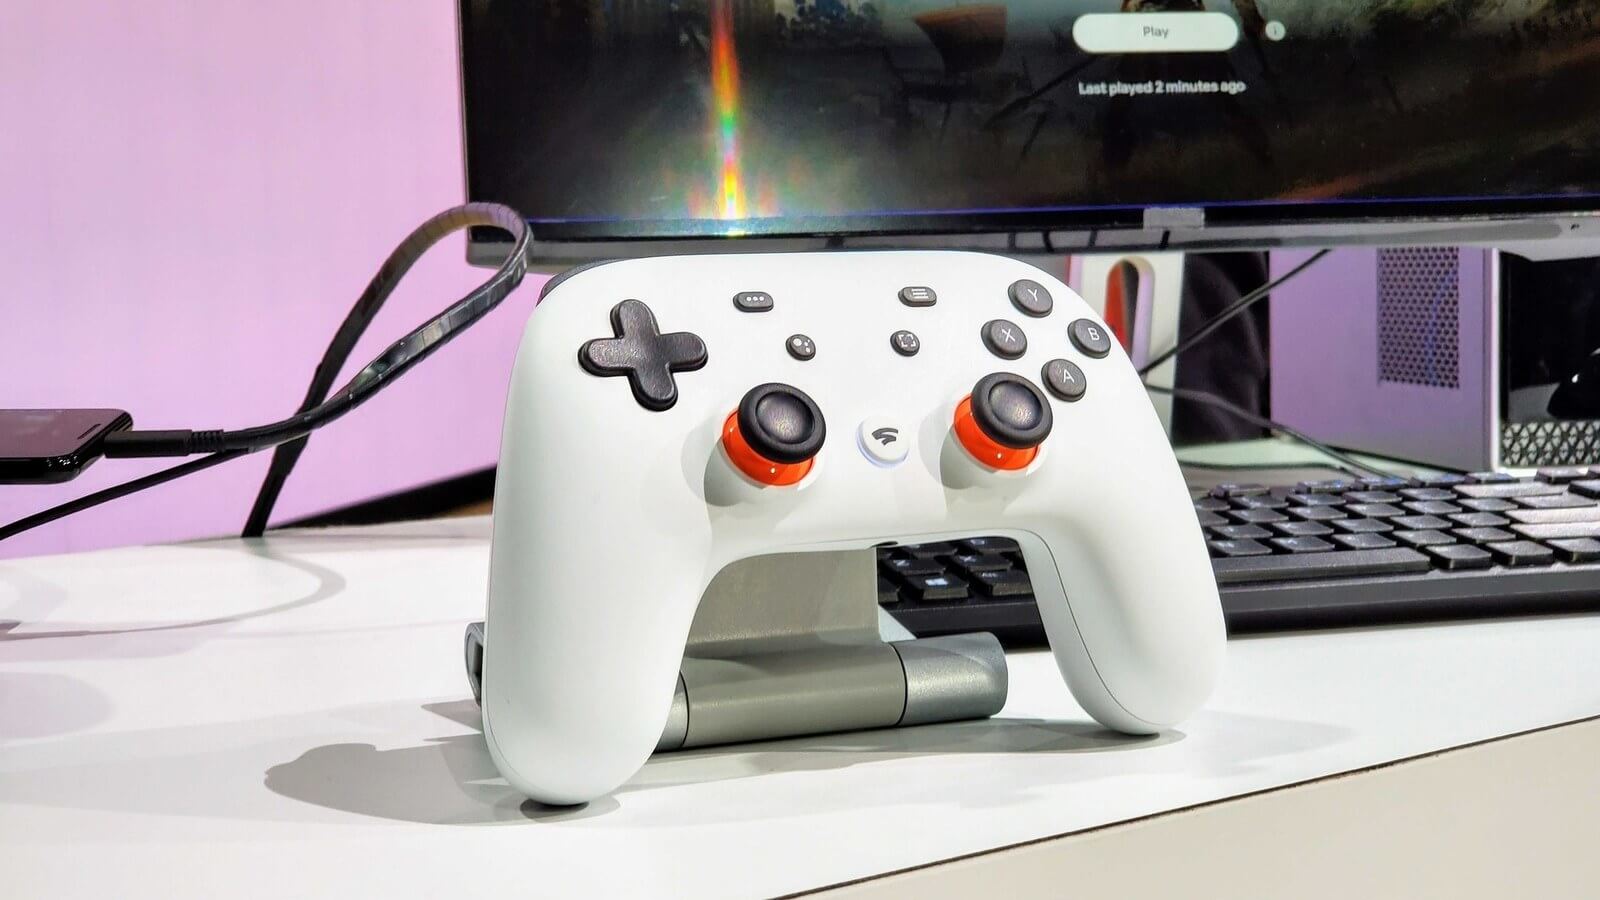 Google Stadia now up for pre-order, launches in November at $10/mo, requires $130 upfront